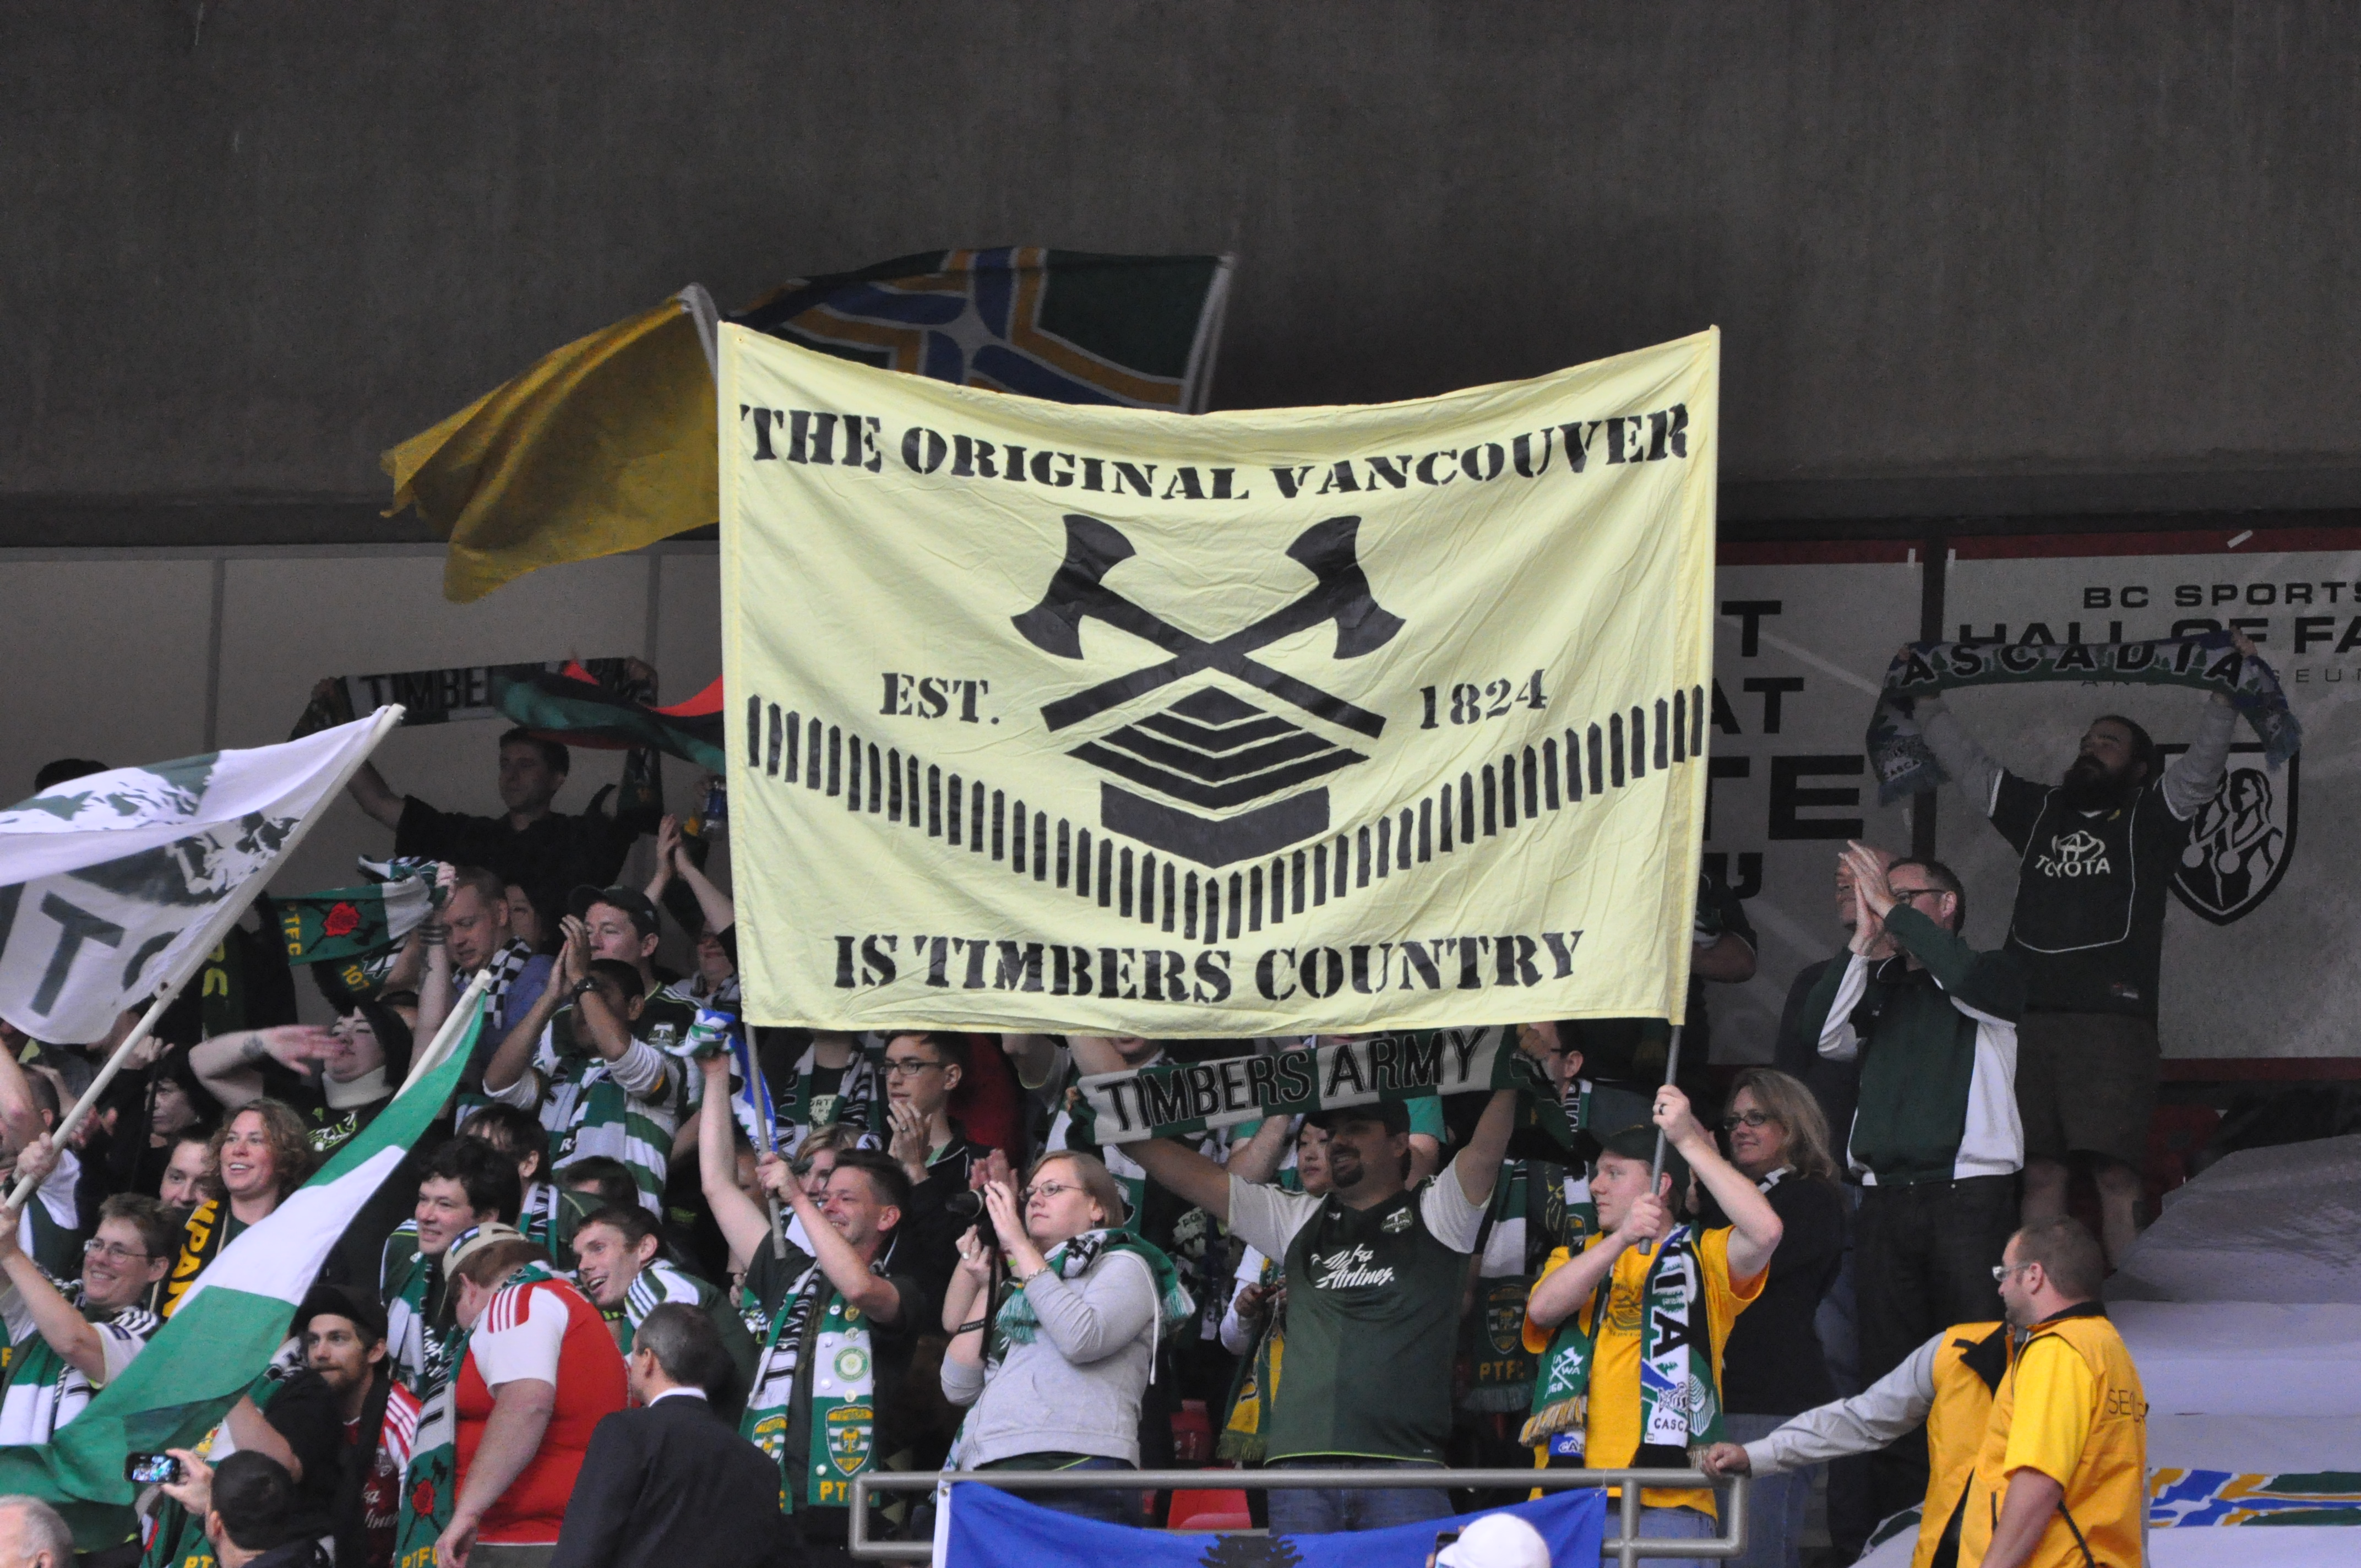 Our house, in the middle of BC!  Timbers win 2-0 over Whitecaps to advance to Conference Final